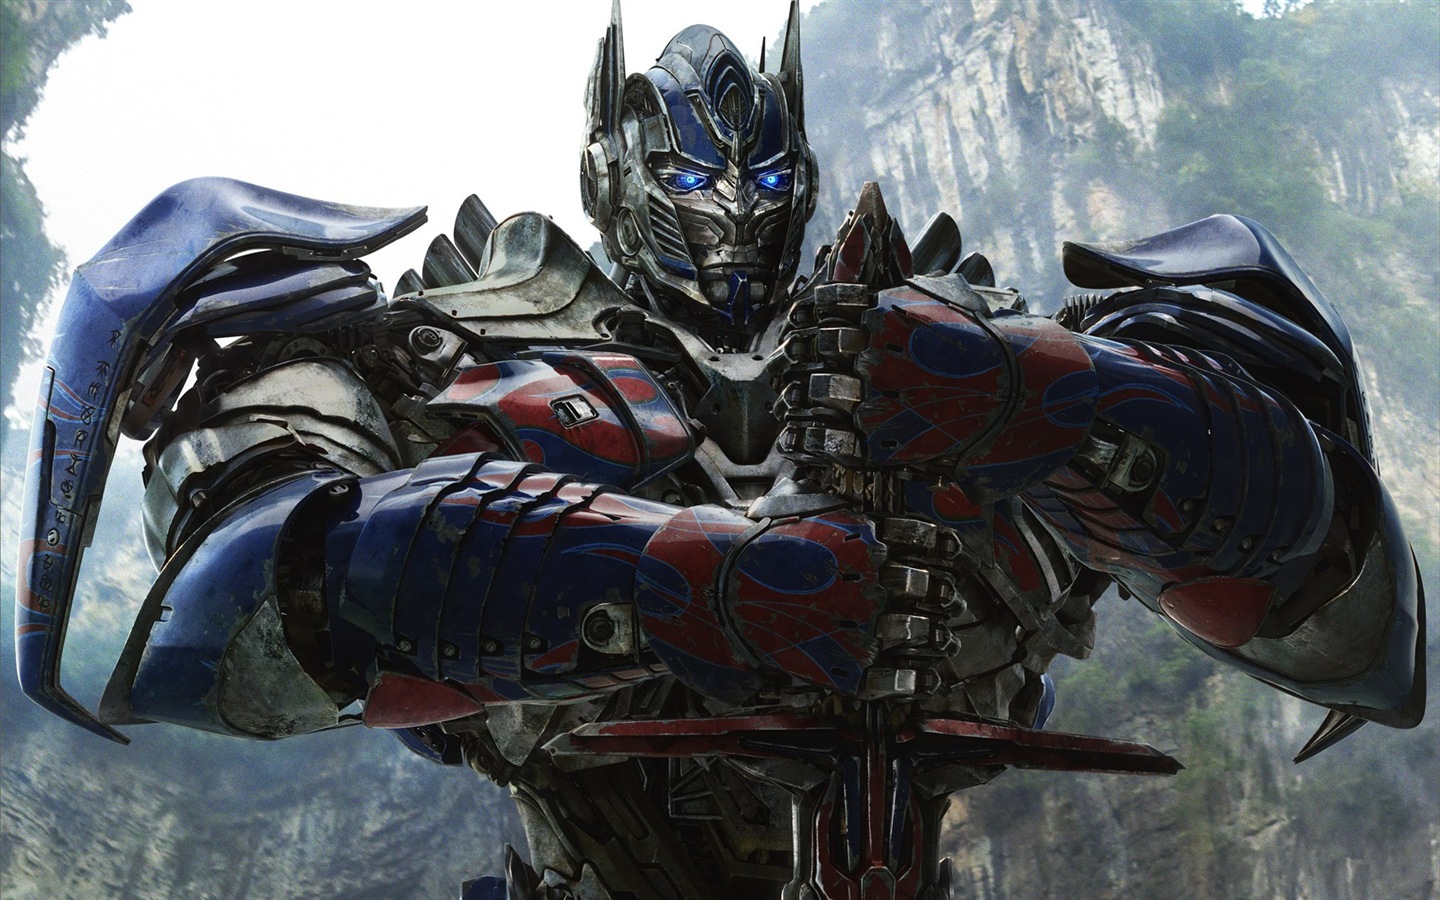 2014 Transformers: Age of Extinction HD wallpapers #10 - 1440x900